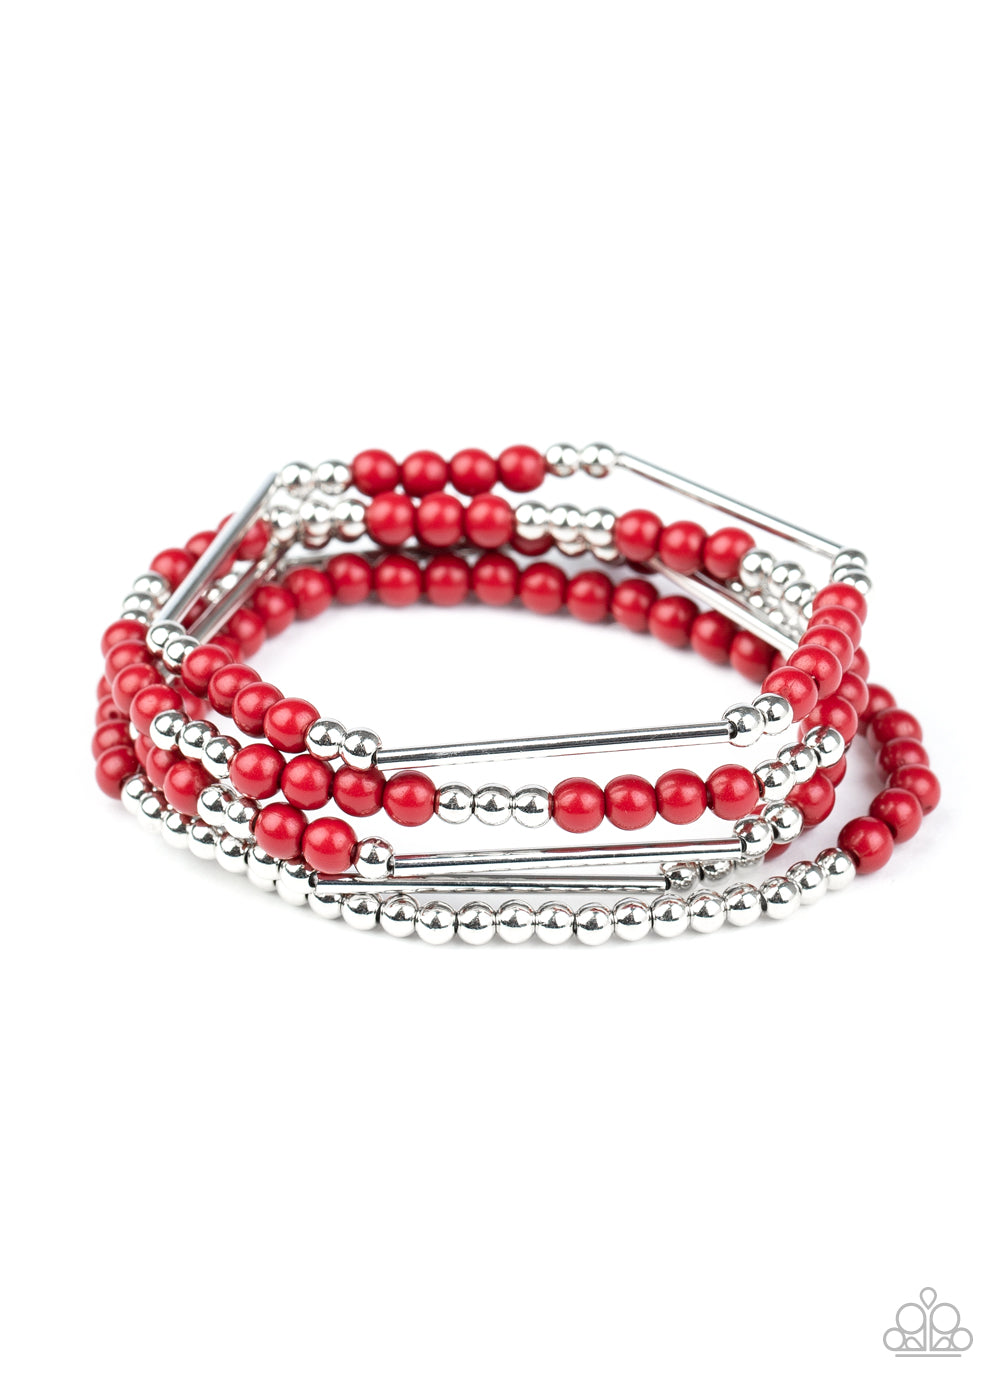 Paparazzi Accessories - BEAD Between The Lines - Red Bracelet - Alies Bling Bar